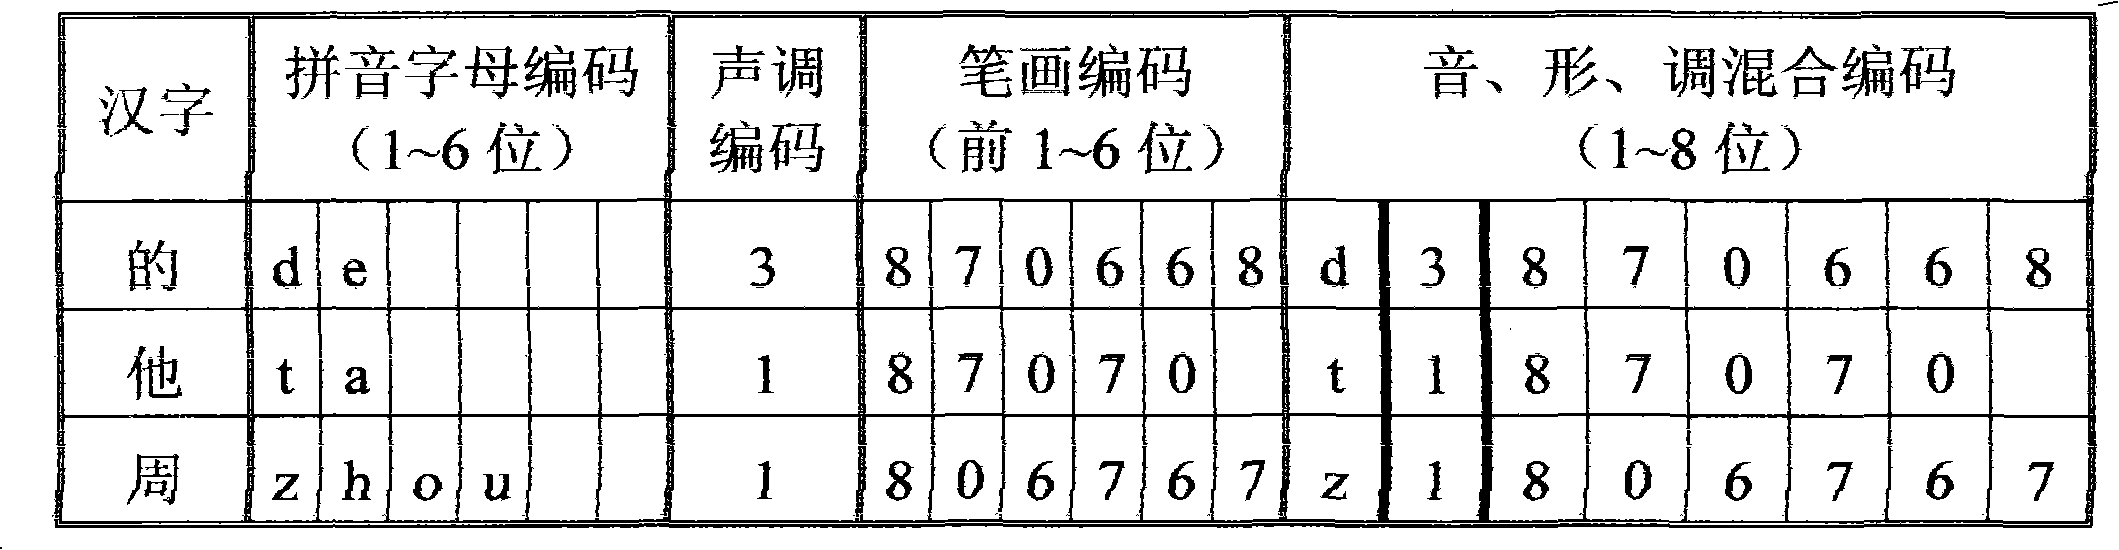 Phonological, calligraphic and tone hybrid coding method for inputting Chinese characters to computer